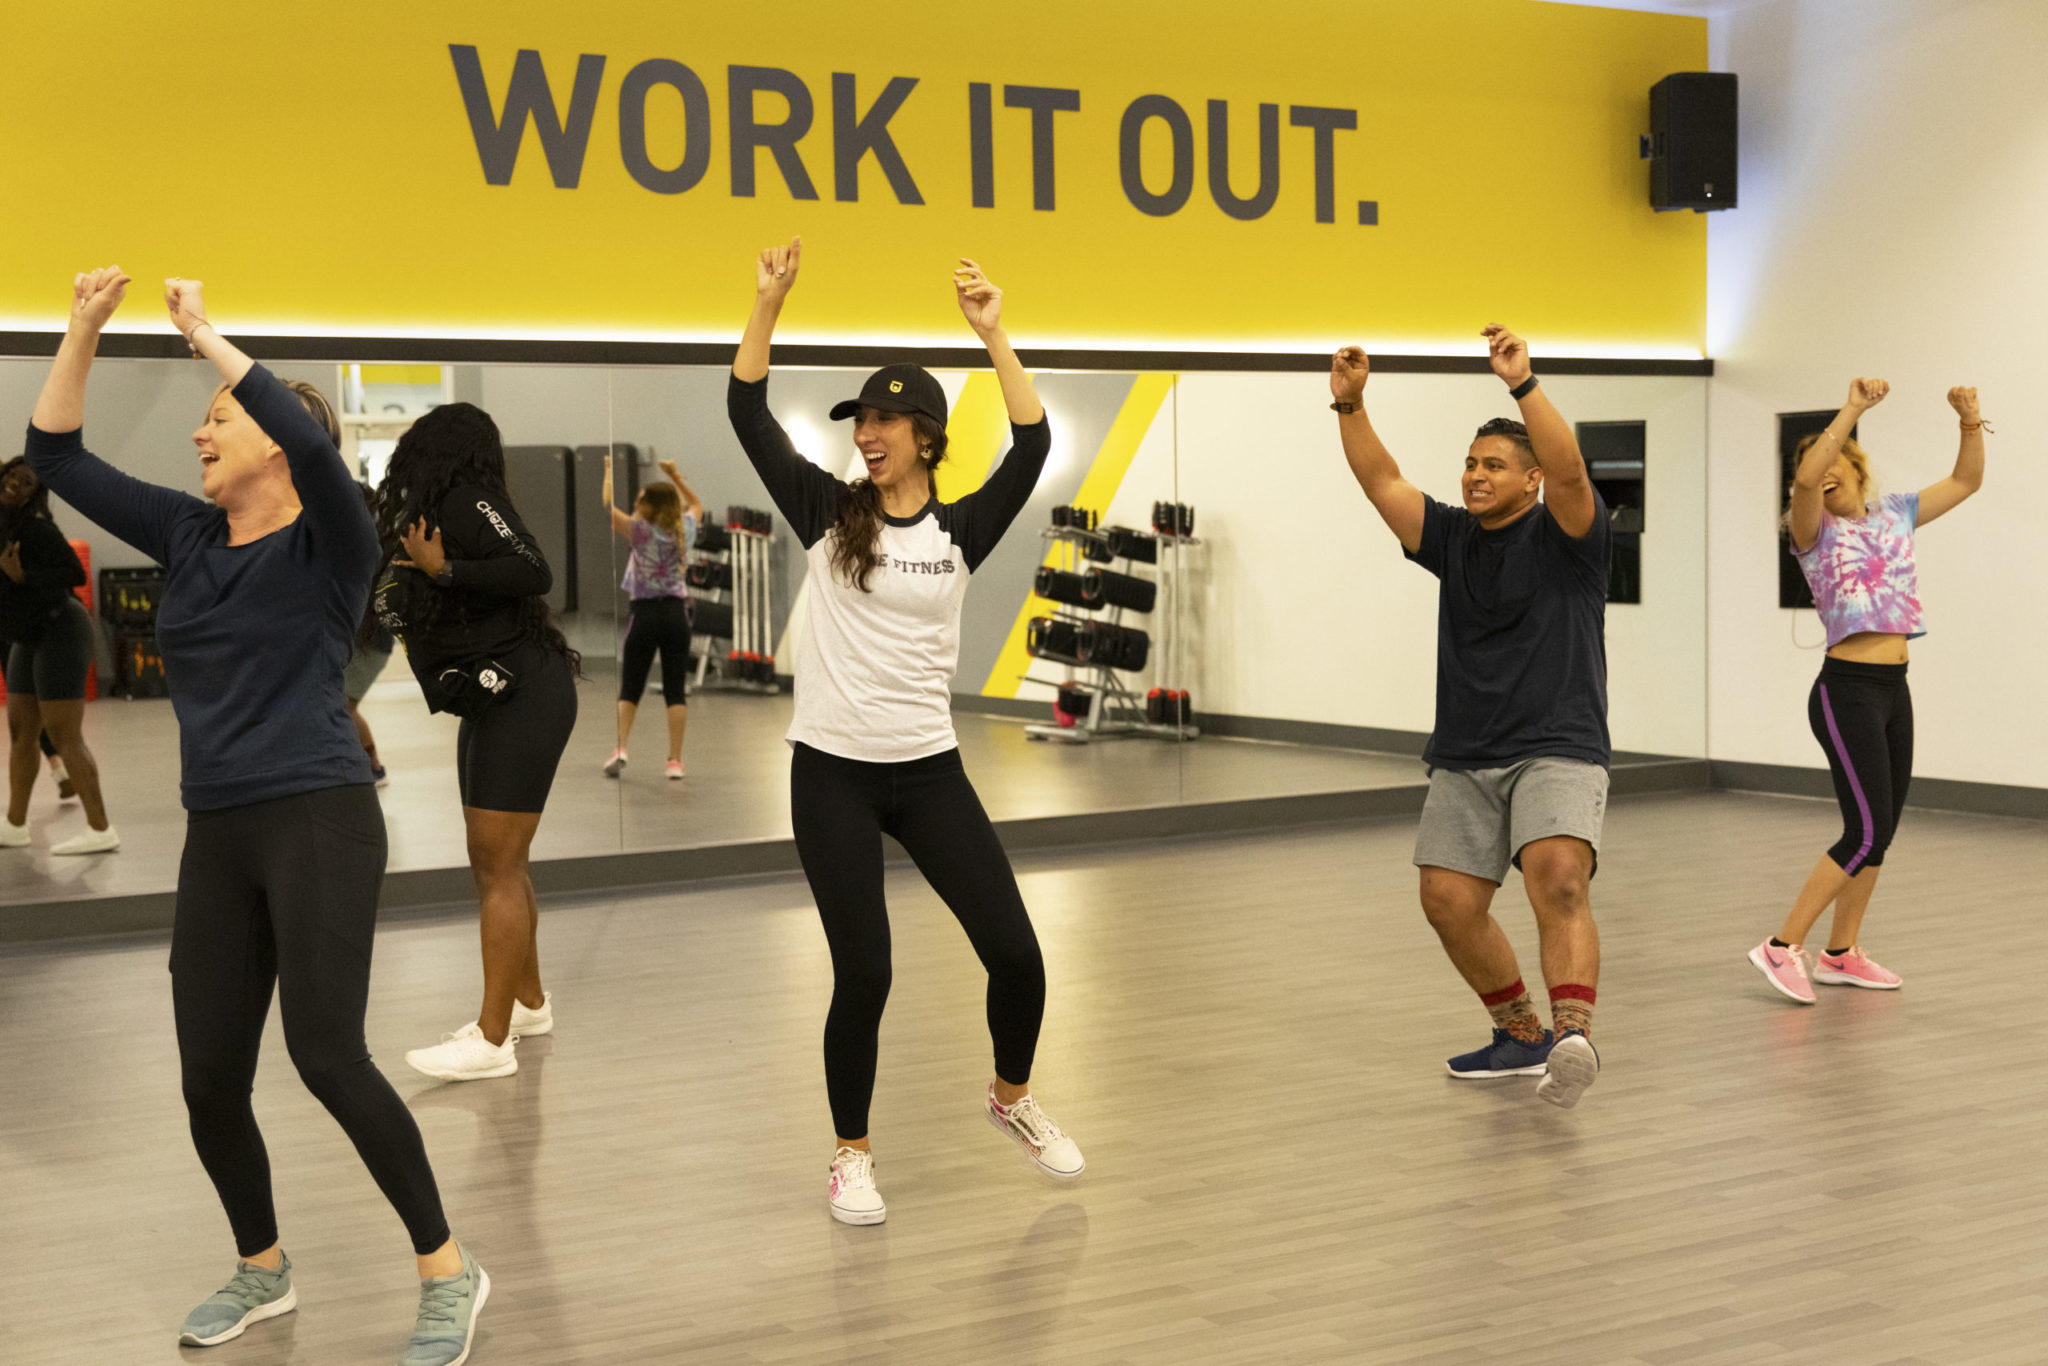 A Look Into The Popular Exercise, Zumba